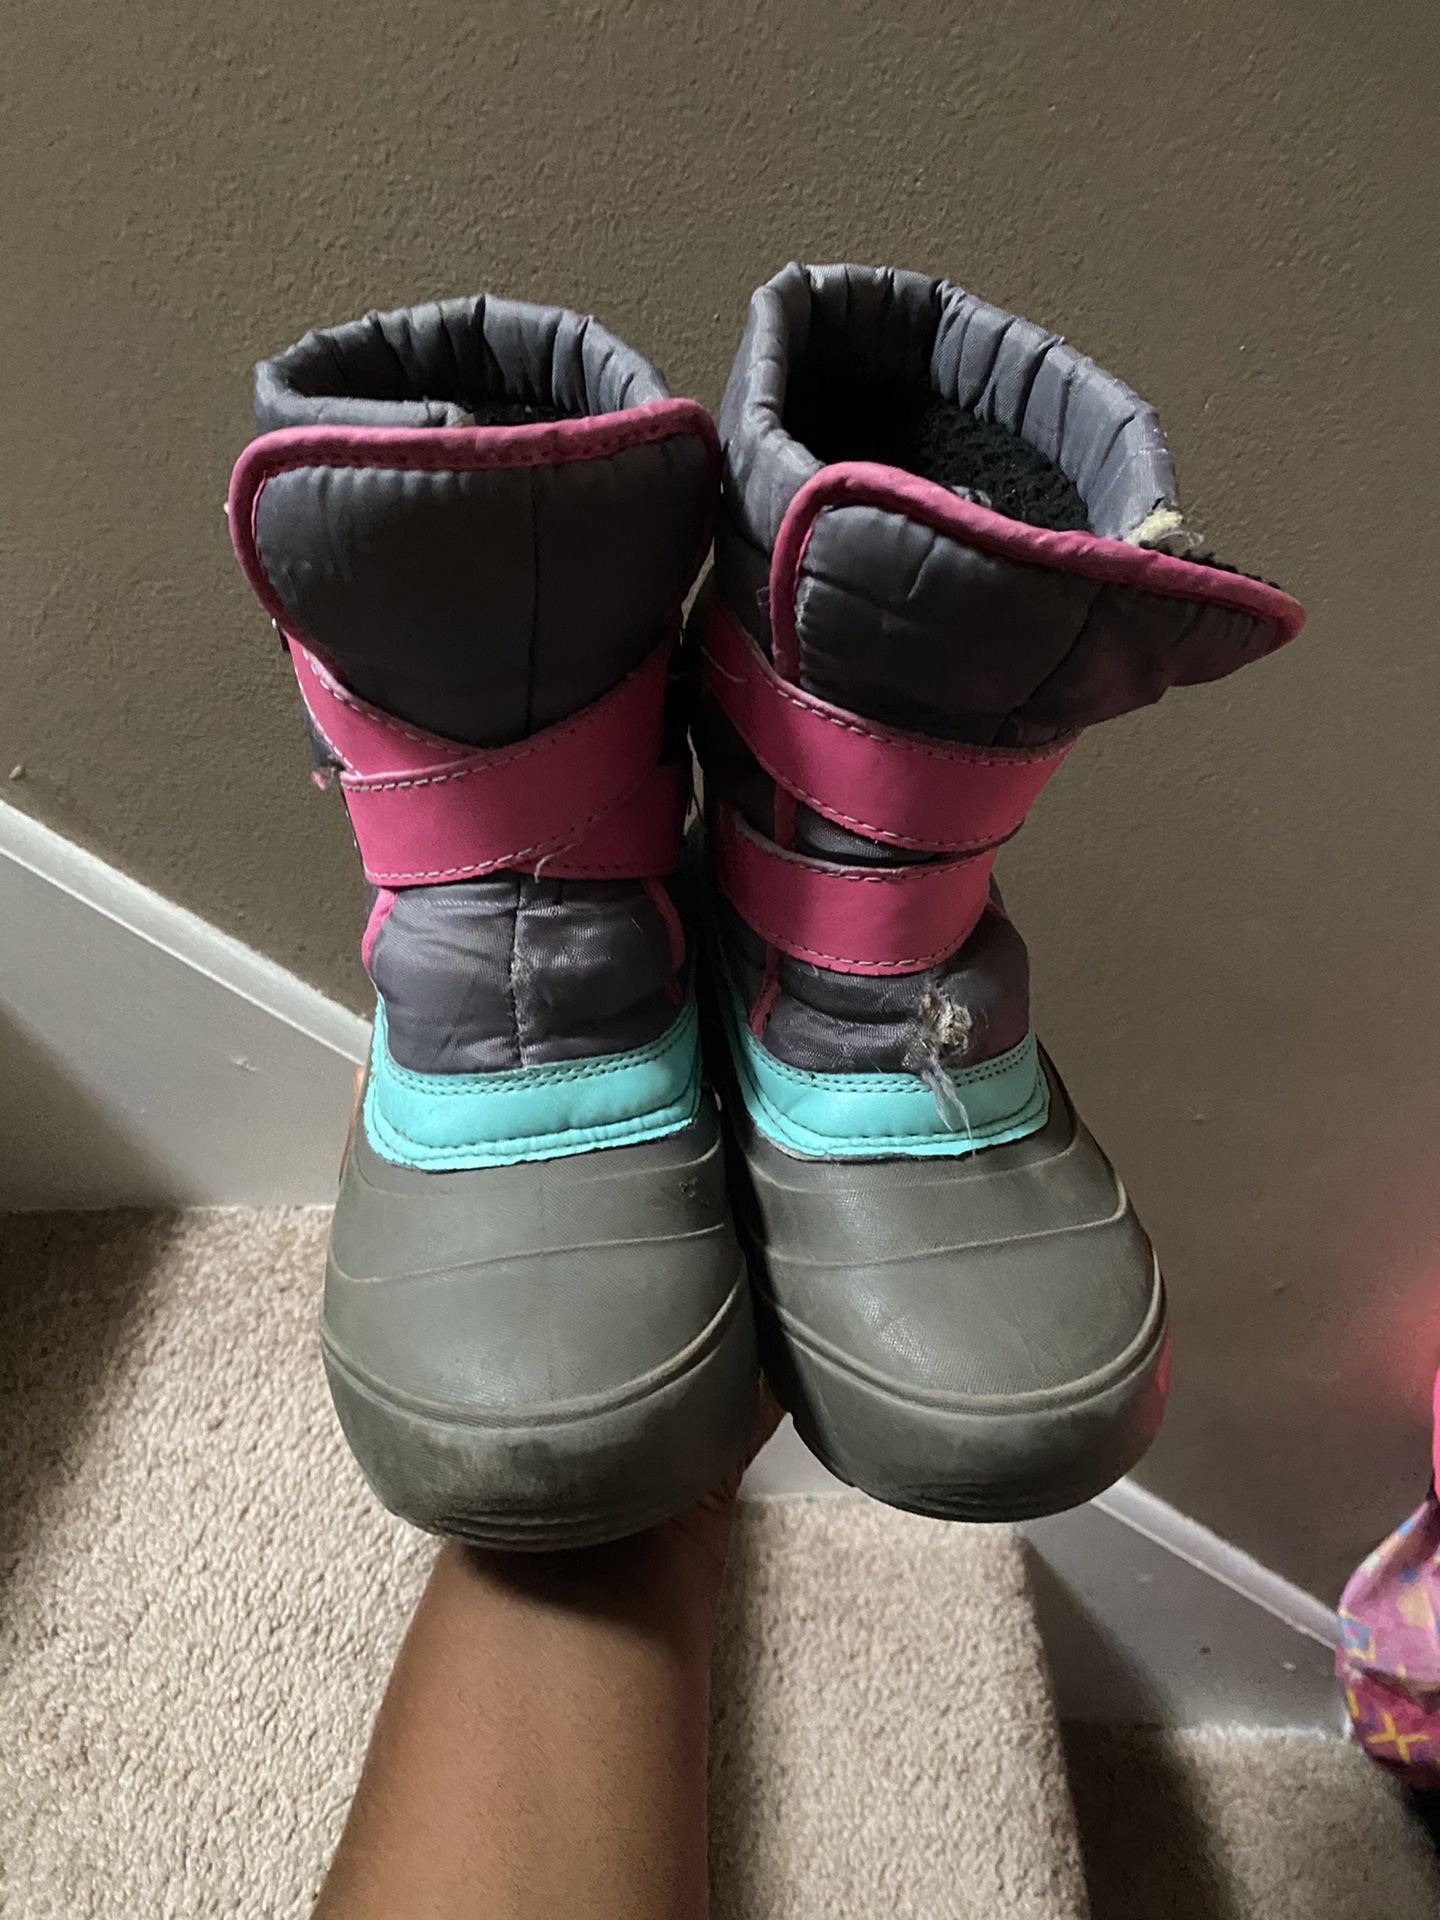 Size 1 girls snow boot